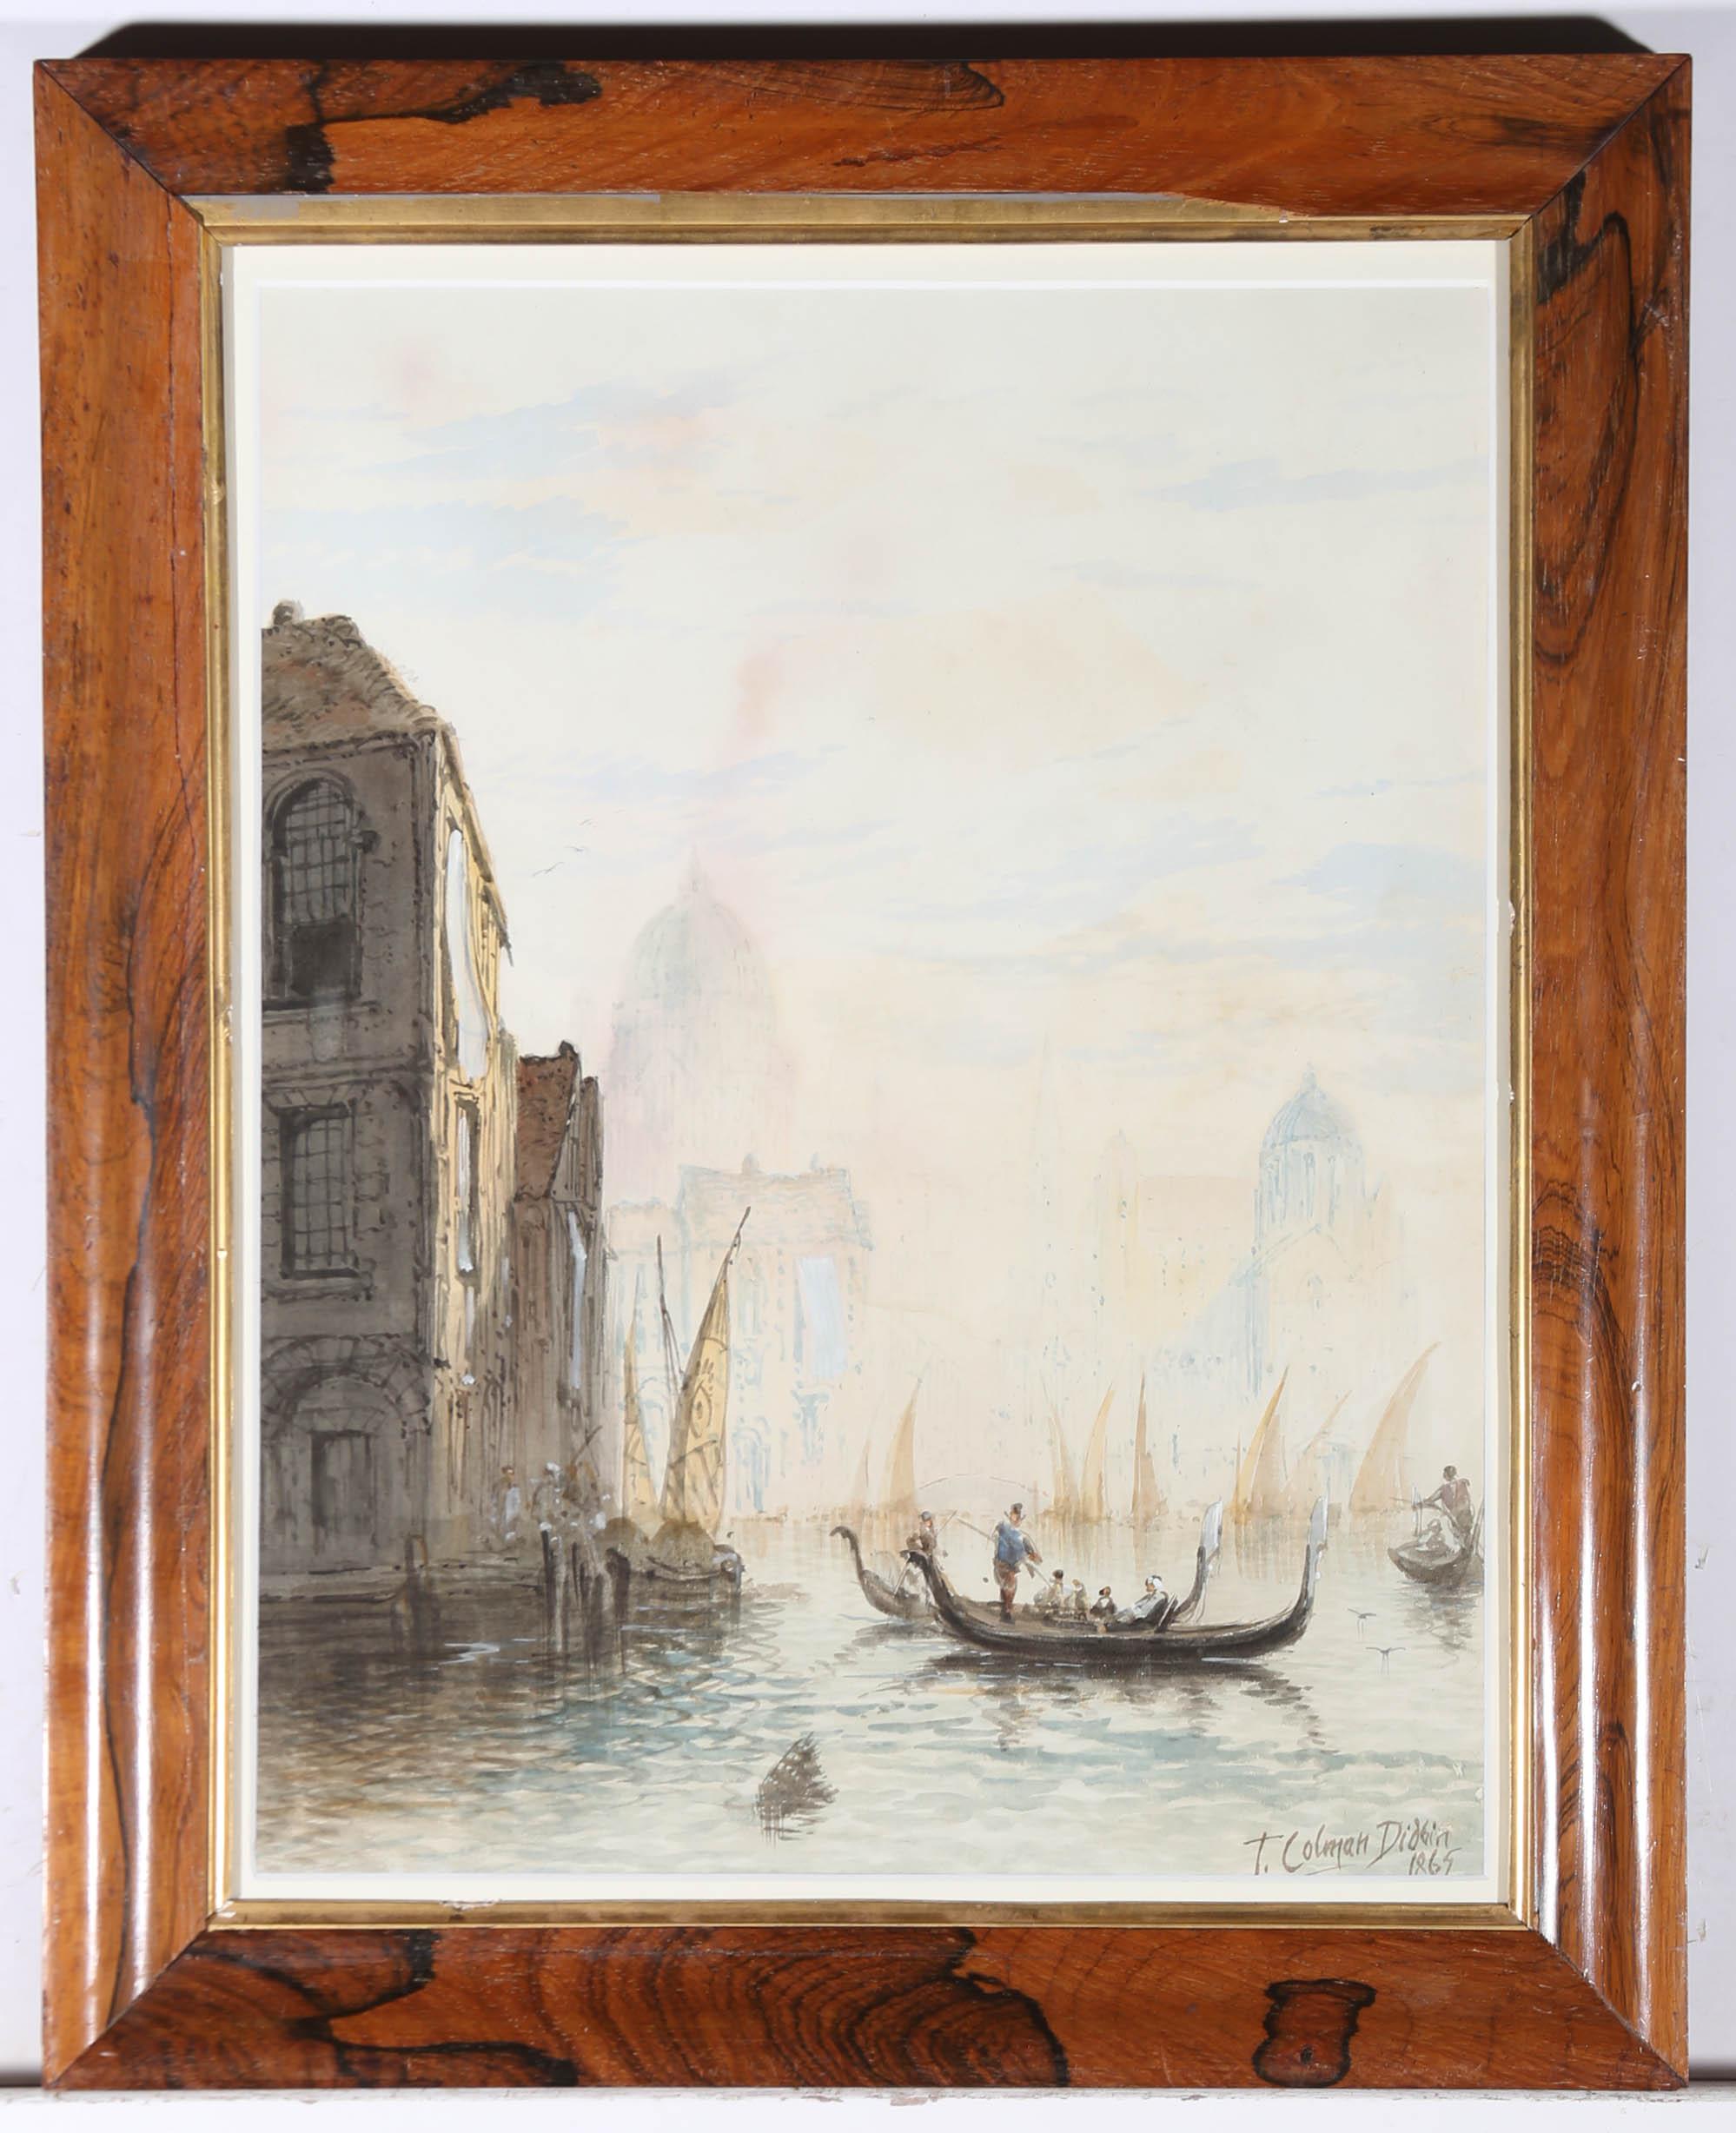 A very fine mid 19th century watercolour of gondolas on the grand canal in Venice, with shadowing church basilica in the background. The artist has signed and dated to the lower right-hand corner, and the painting is well presented in an attractive